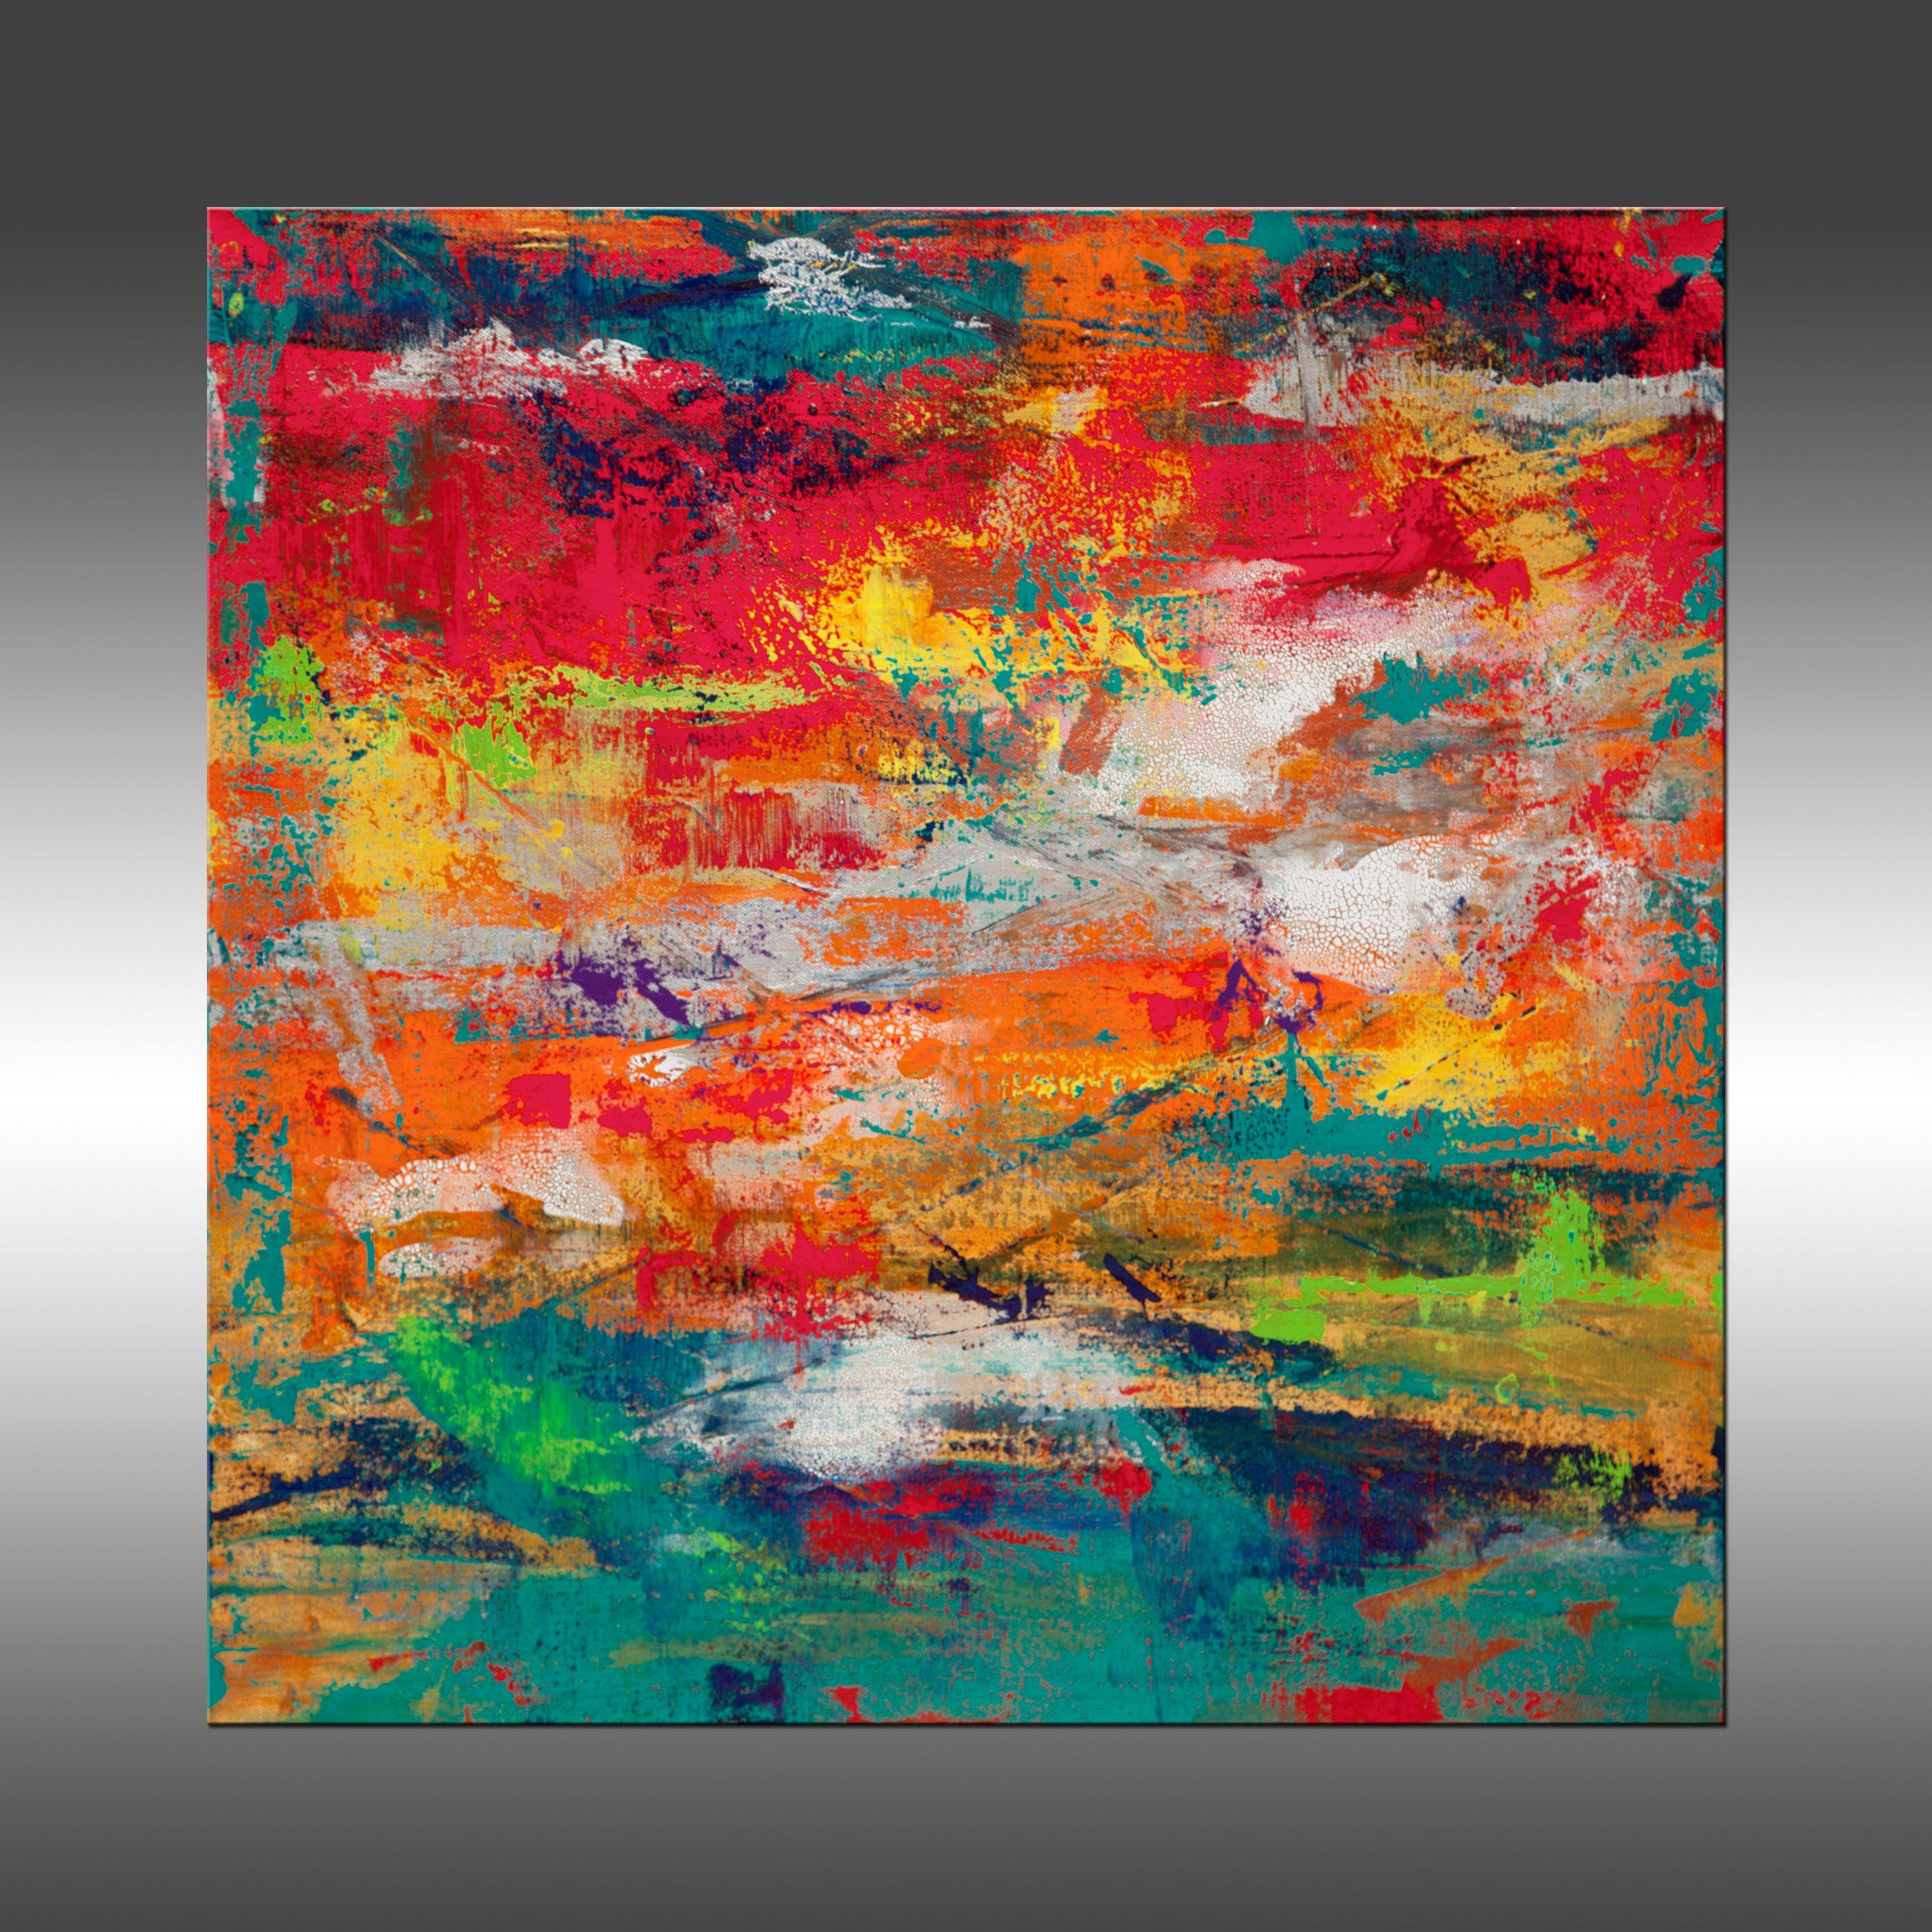 Wonderland is an original painting, created with acrylic paint on gallery-wrapped canvas. It has a width of 24 inches and a height of 24 inches with a depth of 1.5 inches (24x24x1.5).    The colors used in the painting are yellow, orange, green,